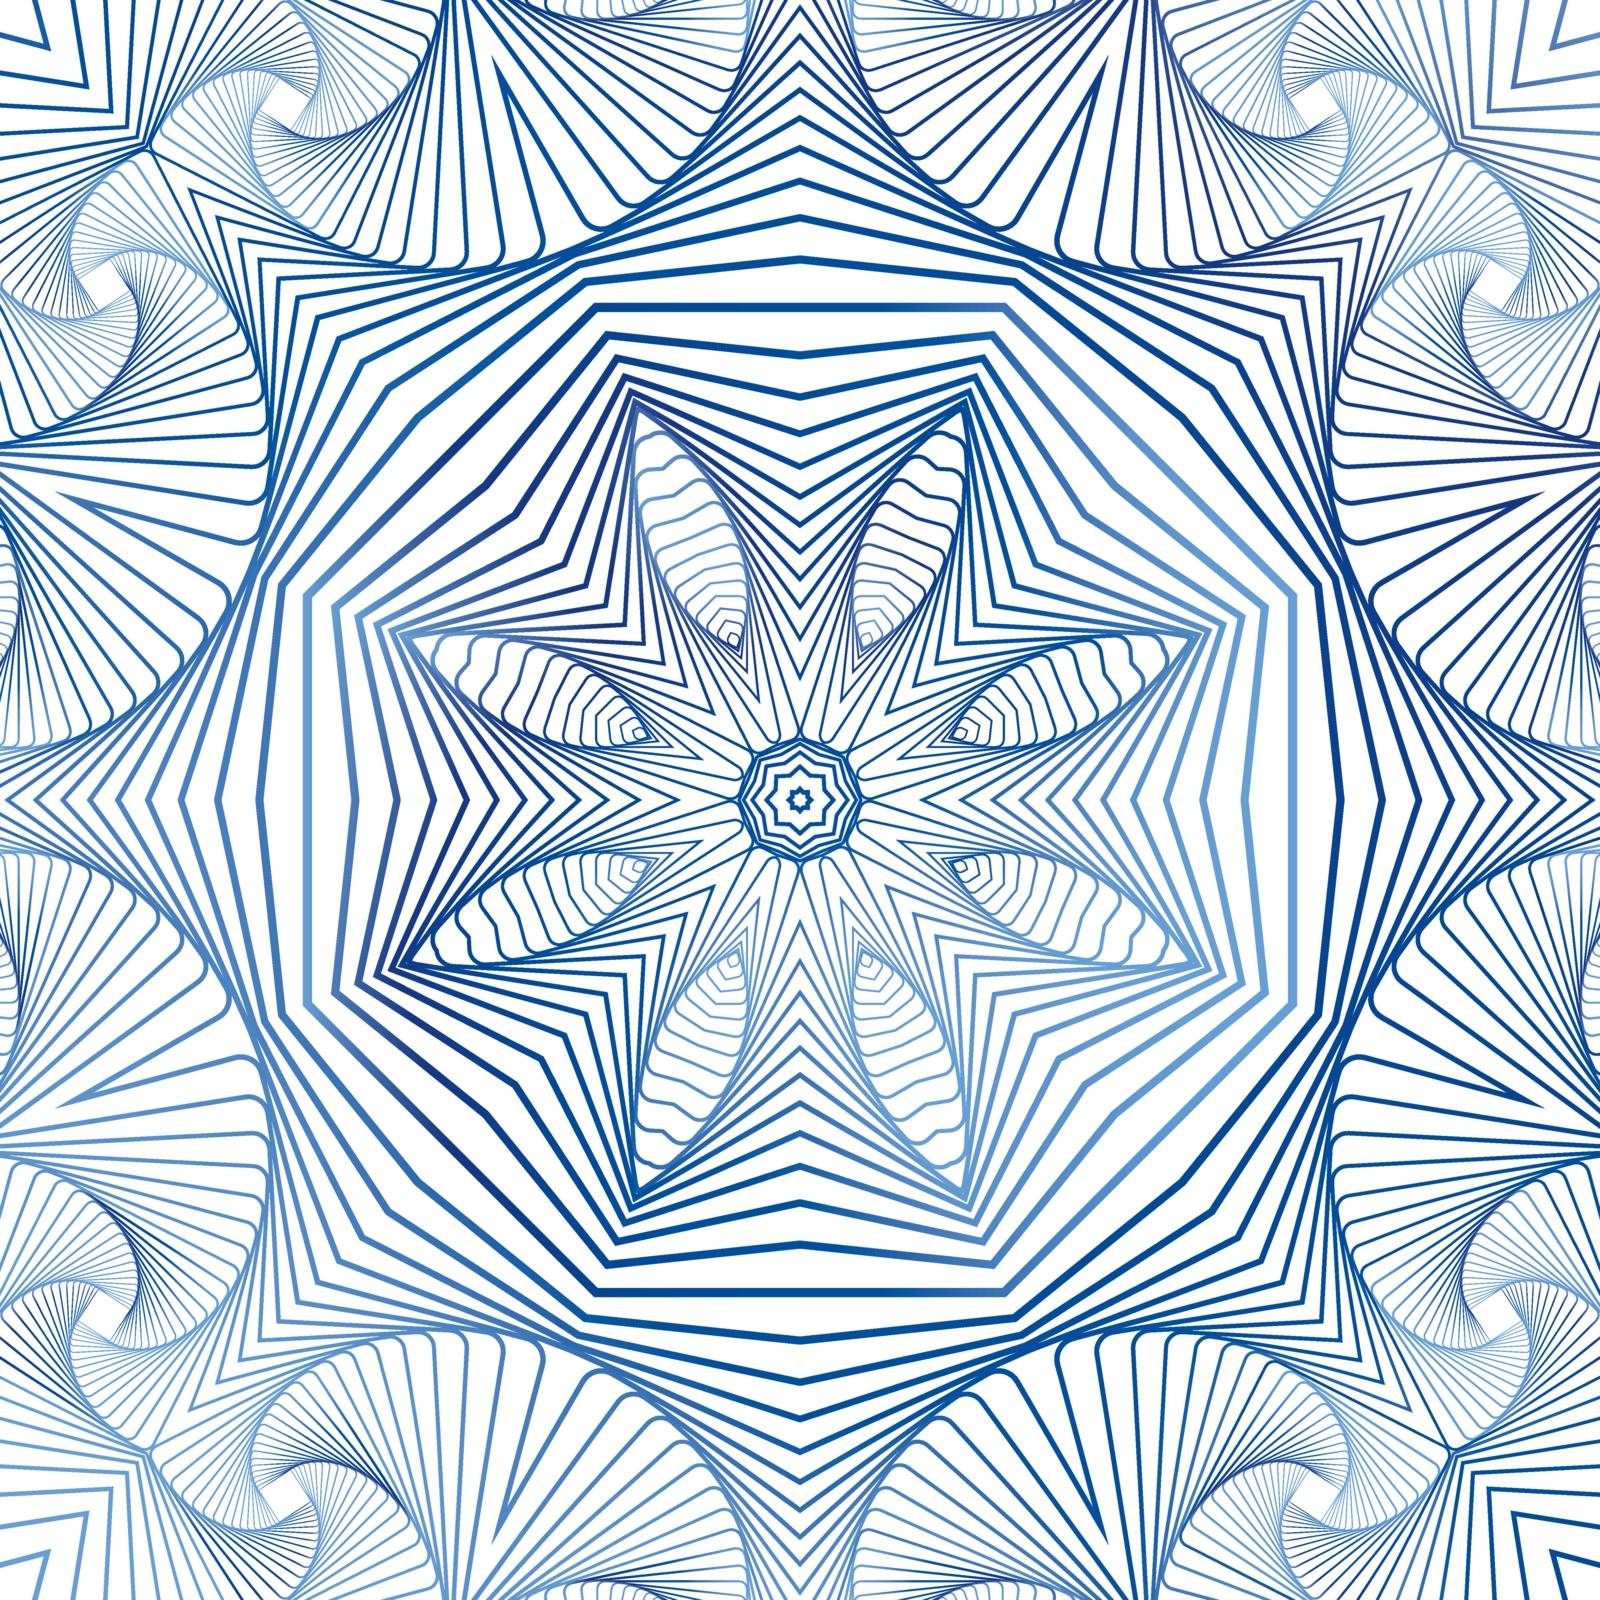 Ornamental seamless pattern with 3D illusion. Repeating background with abstract elements and 3D layer illusion.